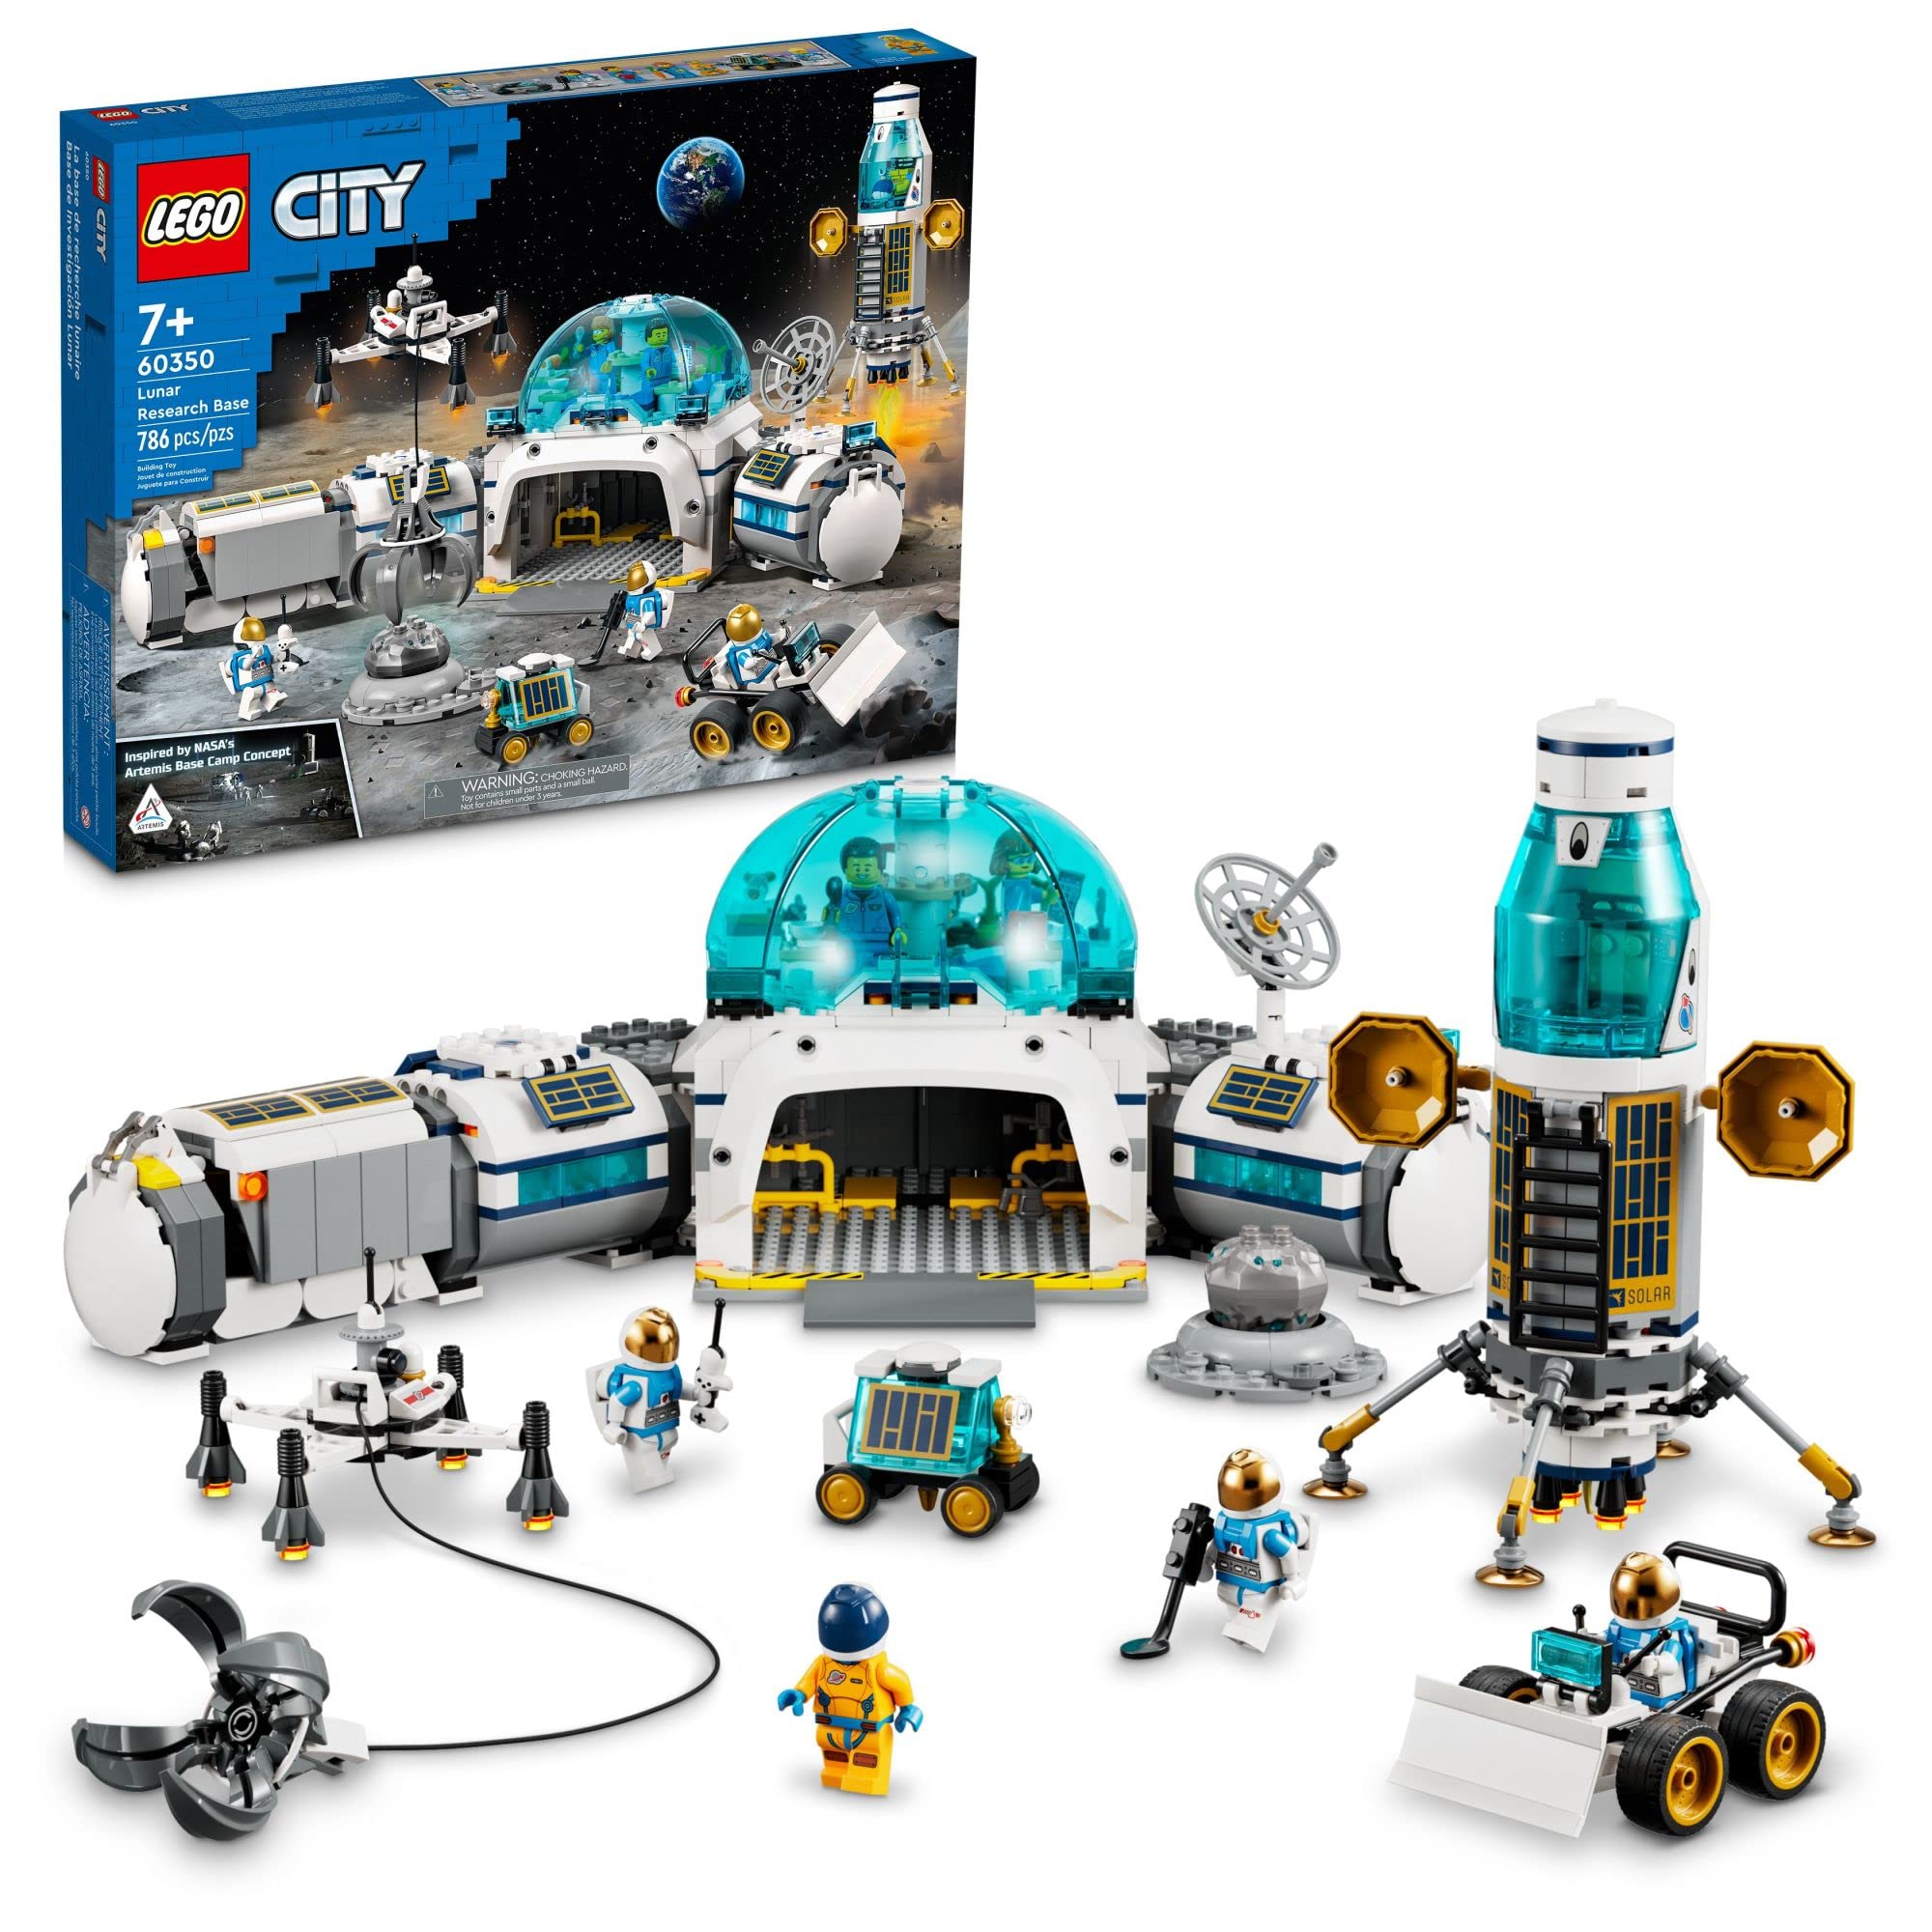 786-Piece LEGO City Lunar Research Base Outer Space Toy $62.40 + Free Shipping